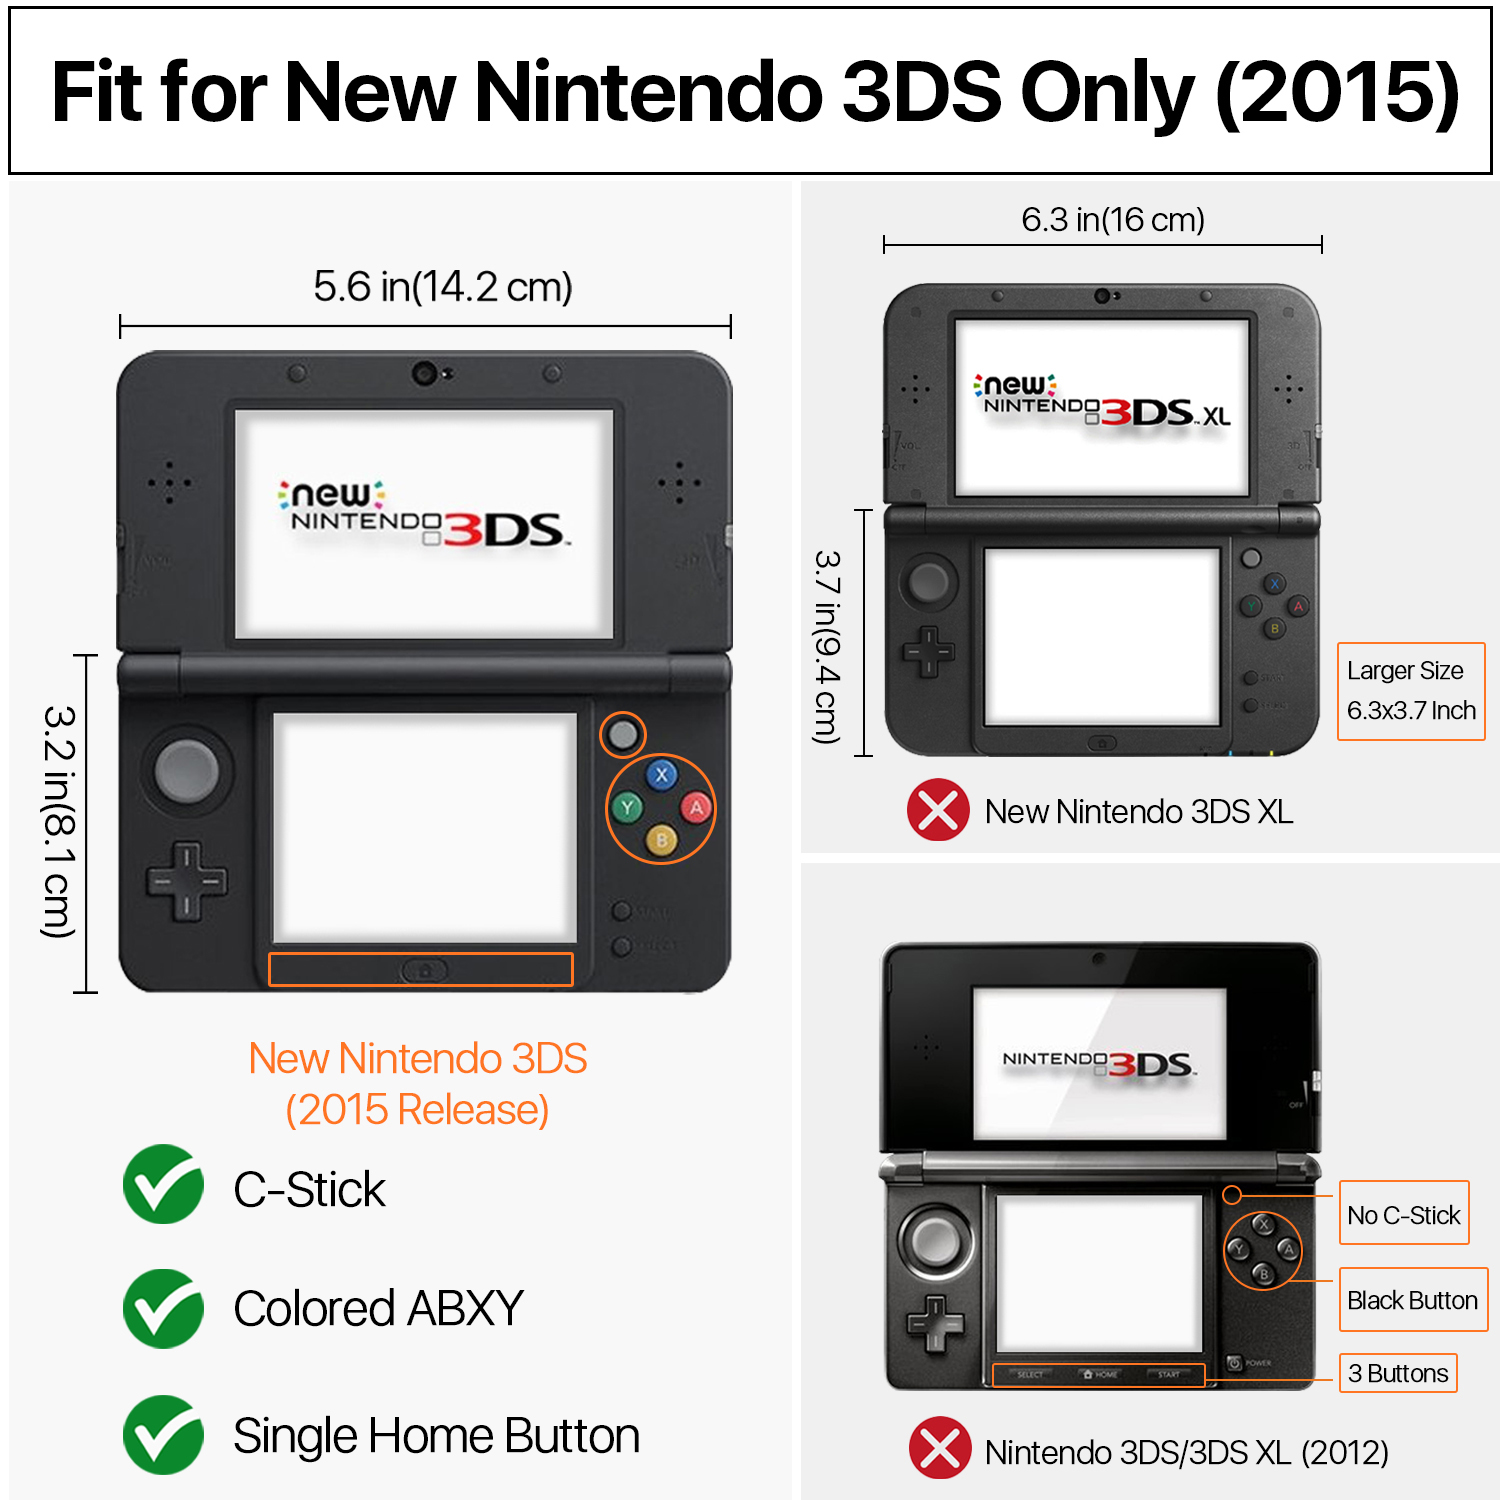 new 3ds not xl